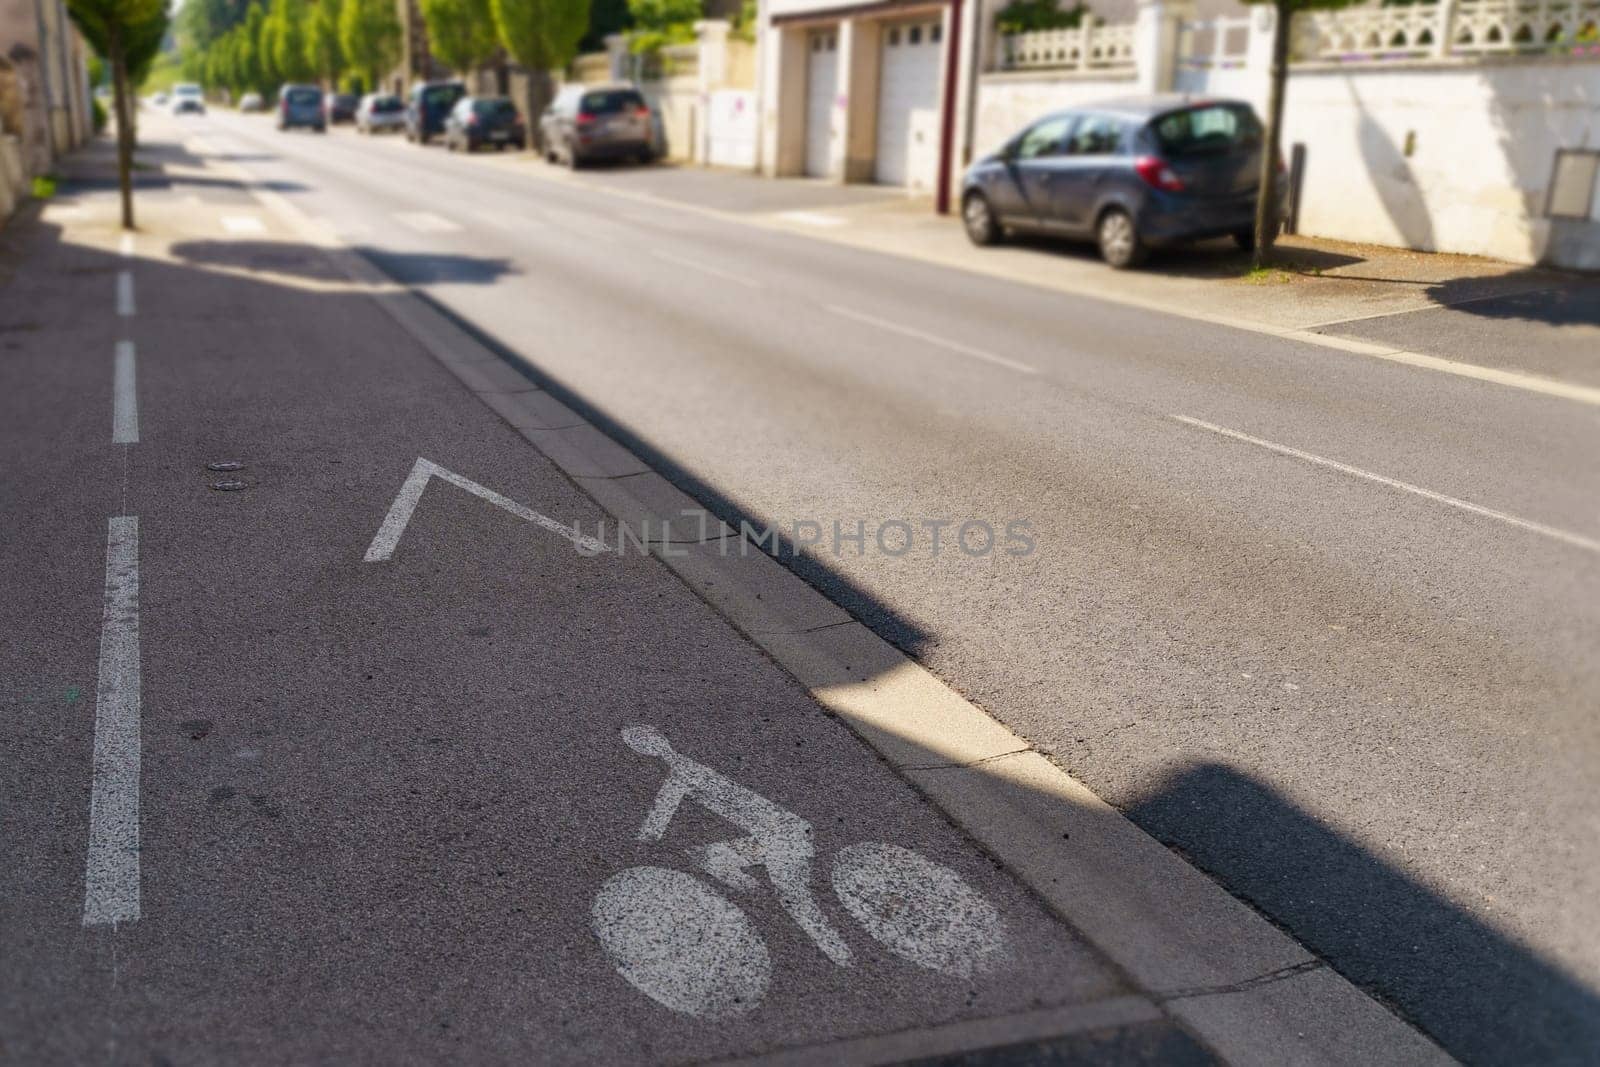 A designated lane for bicycles separated from vehicular traffic by a marked line on the side of a city street.